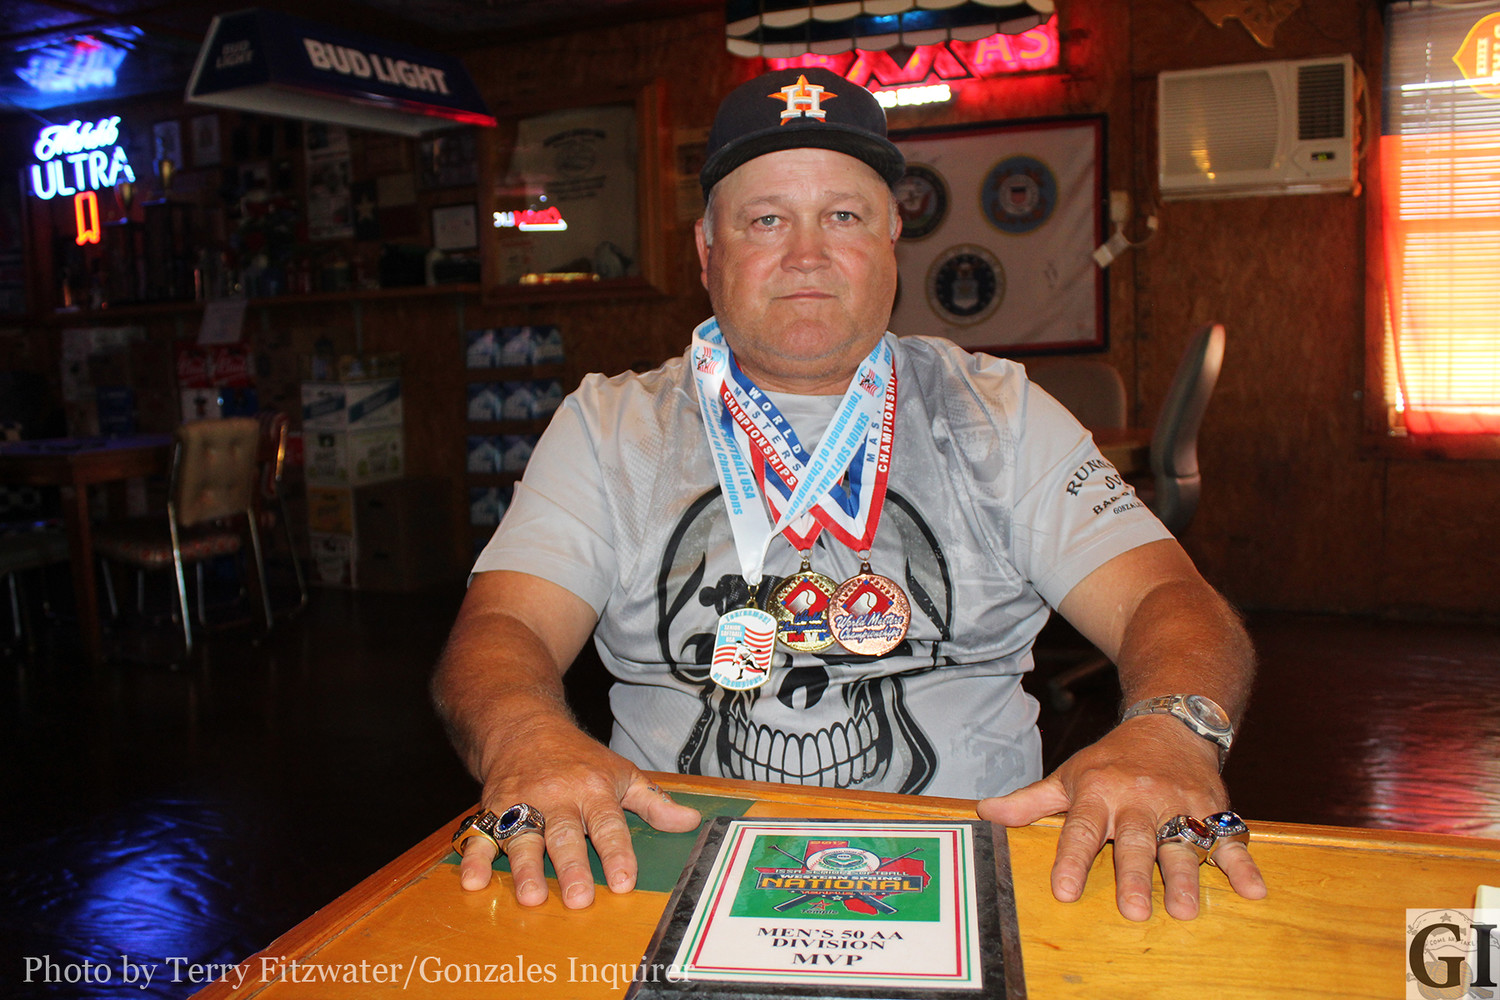 John Henry Wilkerson has a nice collection of medals and rings, but the modest man from Gonzales never shows them off or brags about them. In fact, this newspaper had to ask him five or six times to agree to do this story—that’s how humble he is. Here, he shows off the rings he’s won.